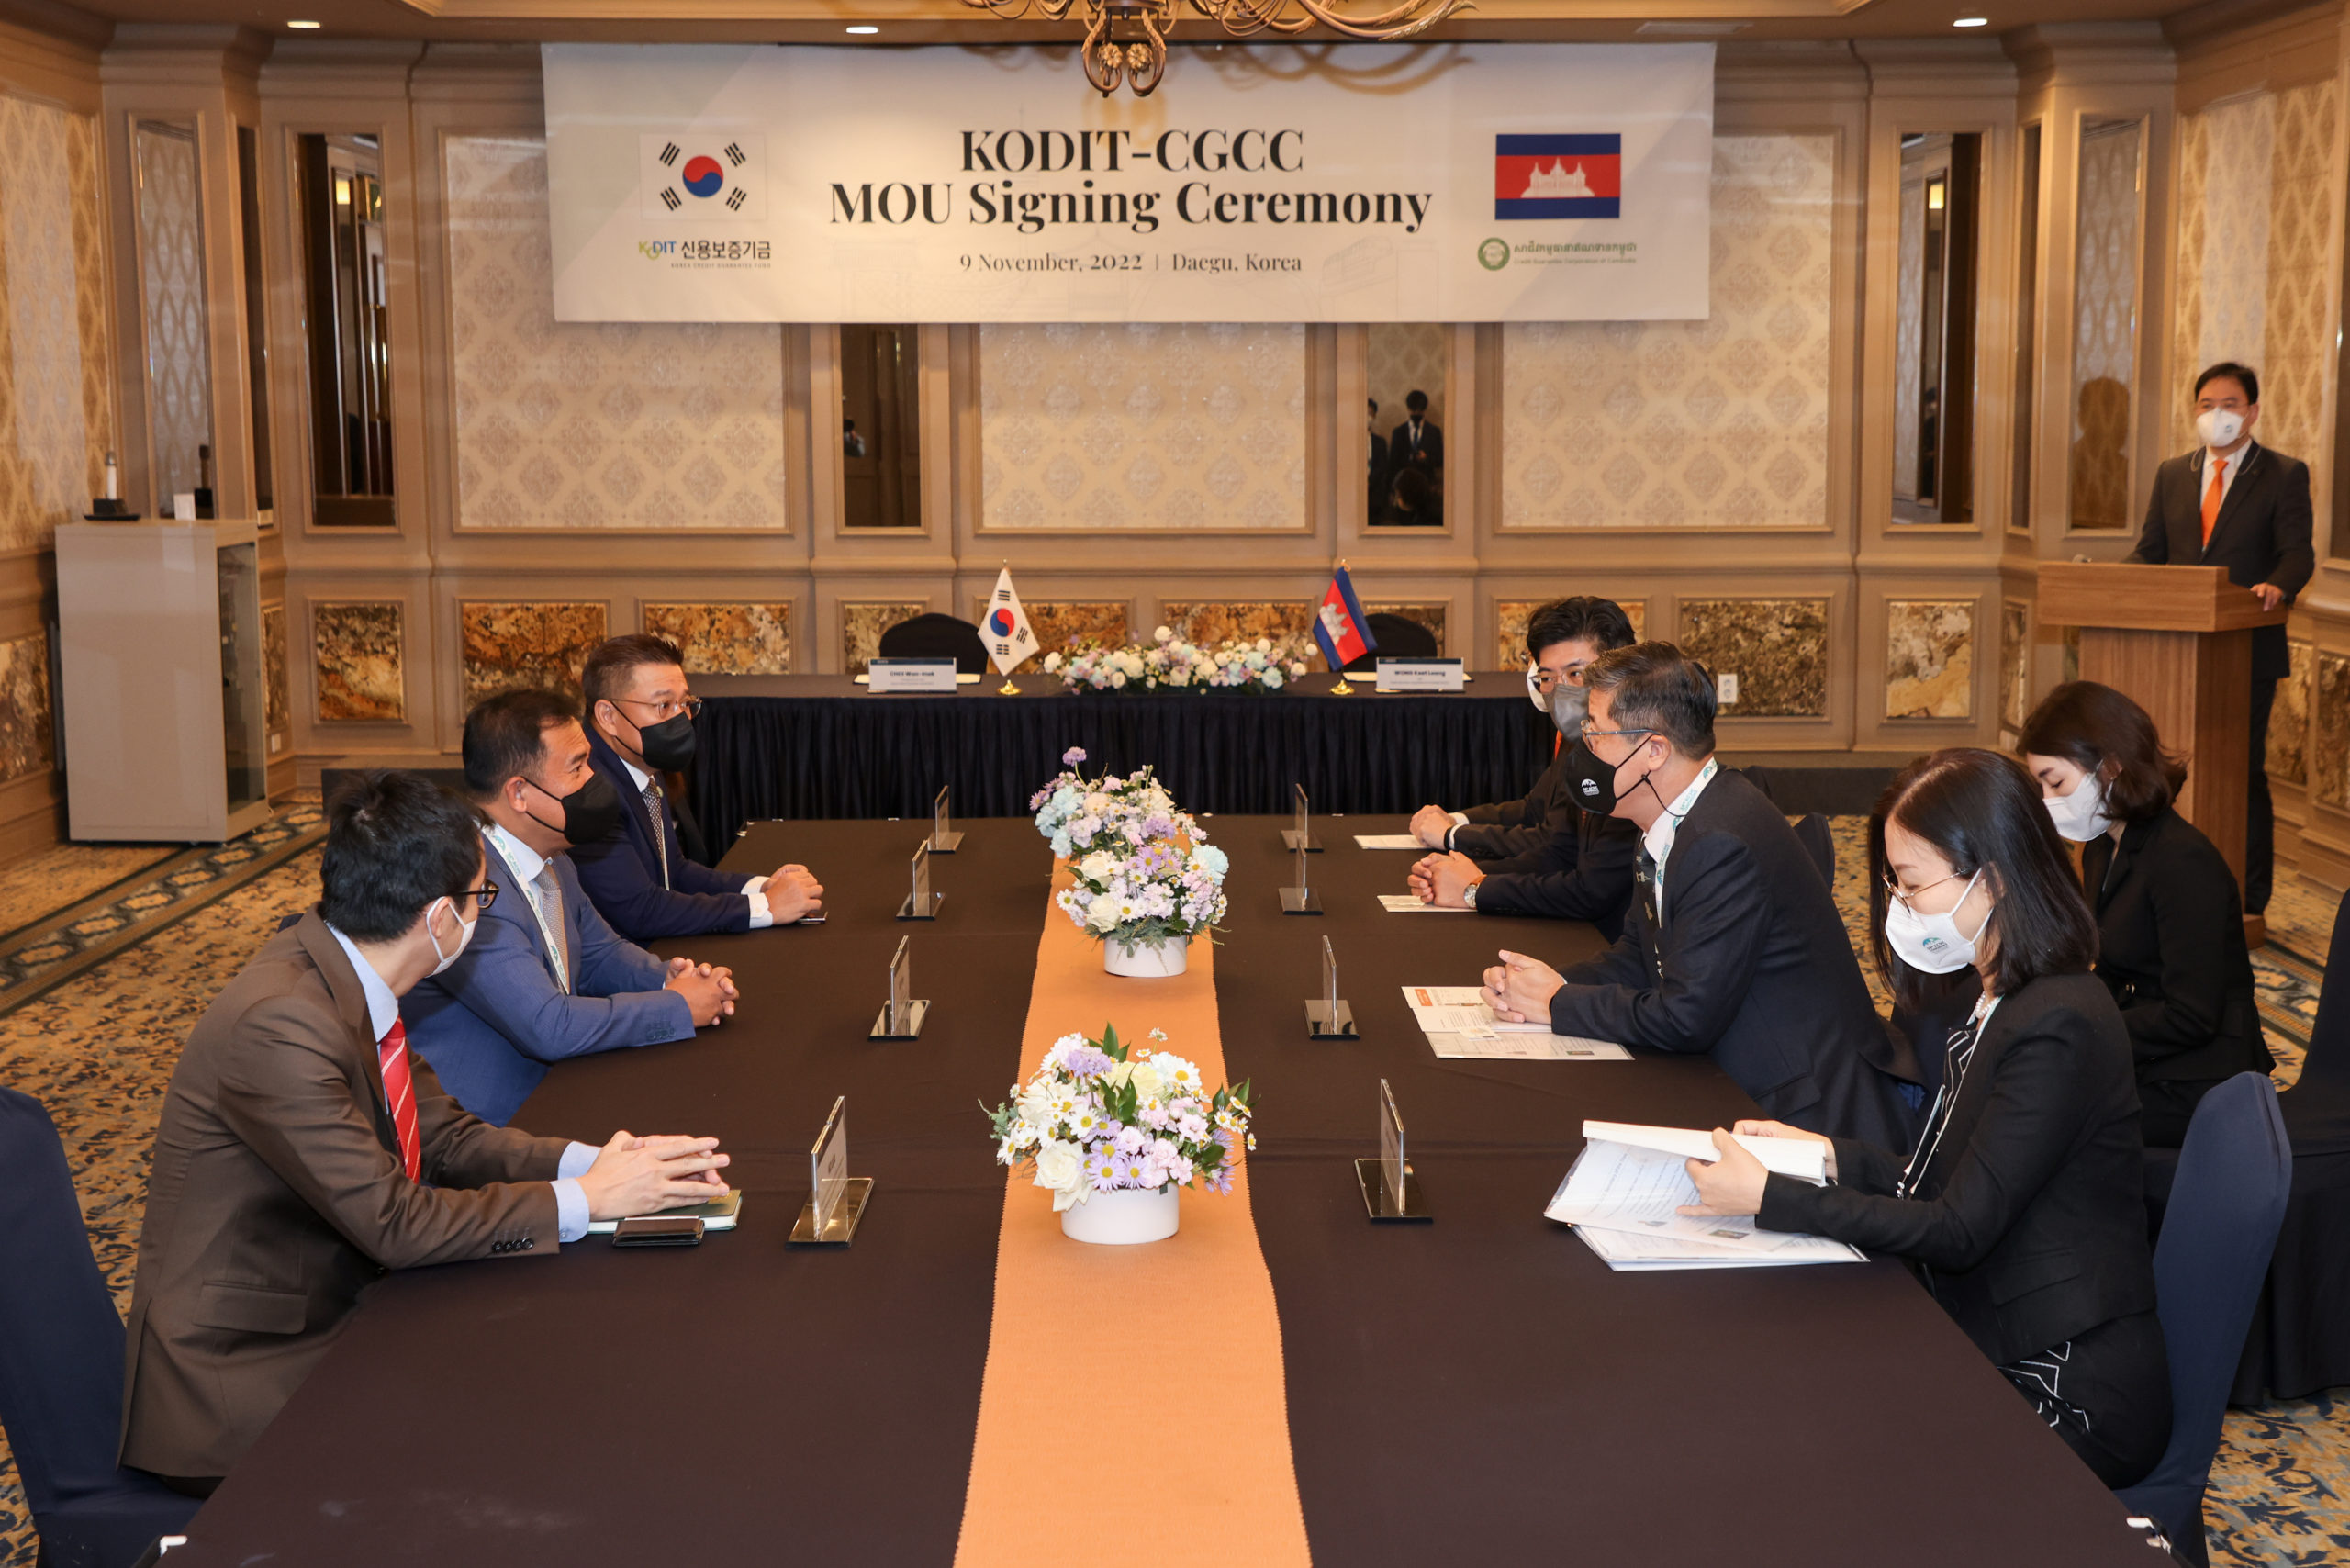 “CGCC and Korea Credit Guarantee Fund Signed a MOU to Enhance the Development of Credit Guarantee and Financial Support for Asian's SMEs”